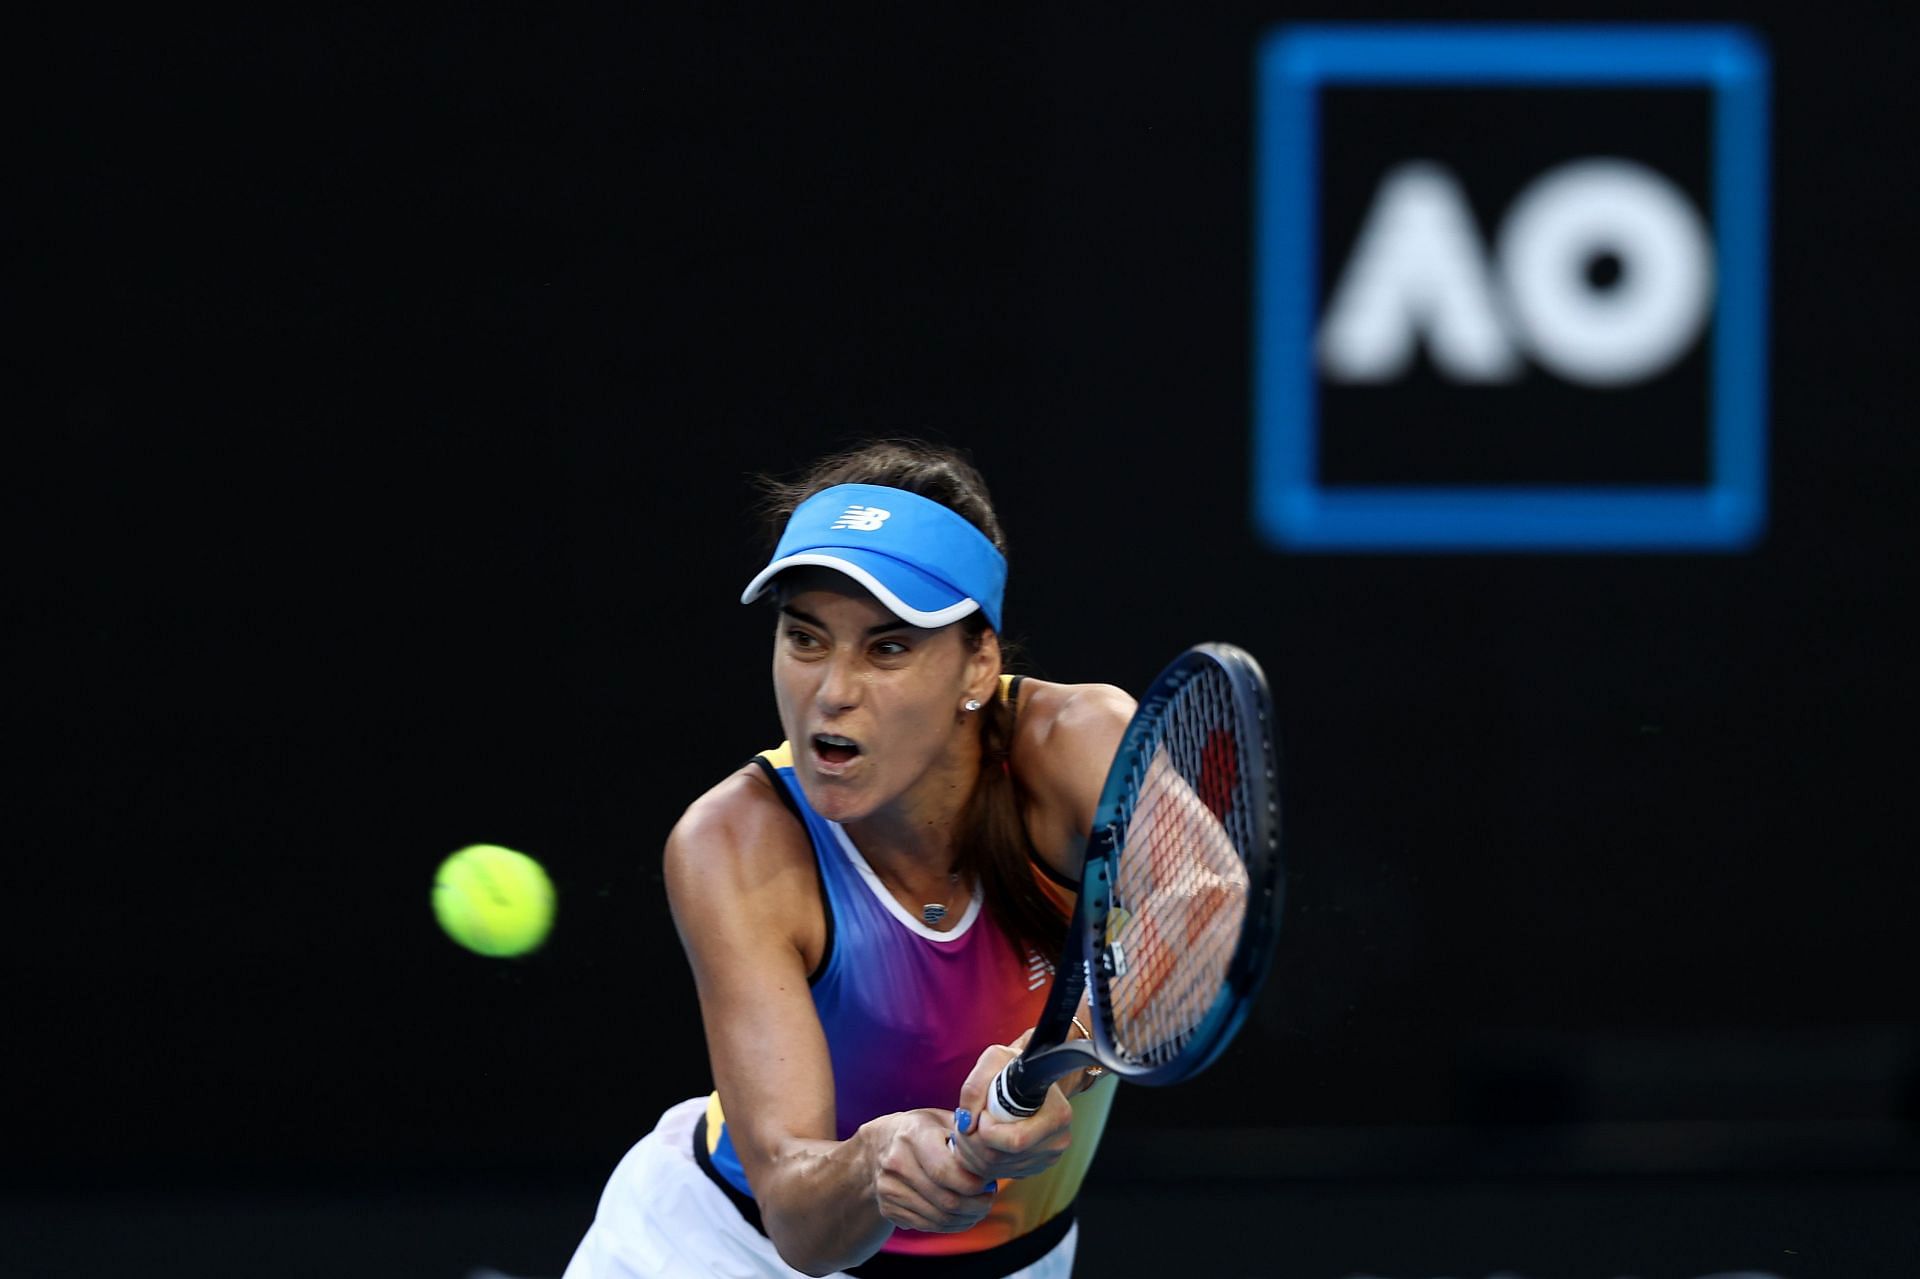 Cirstea will be looking to make a deep run in Lyon